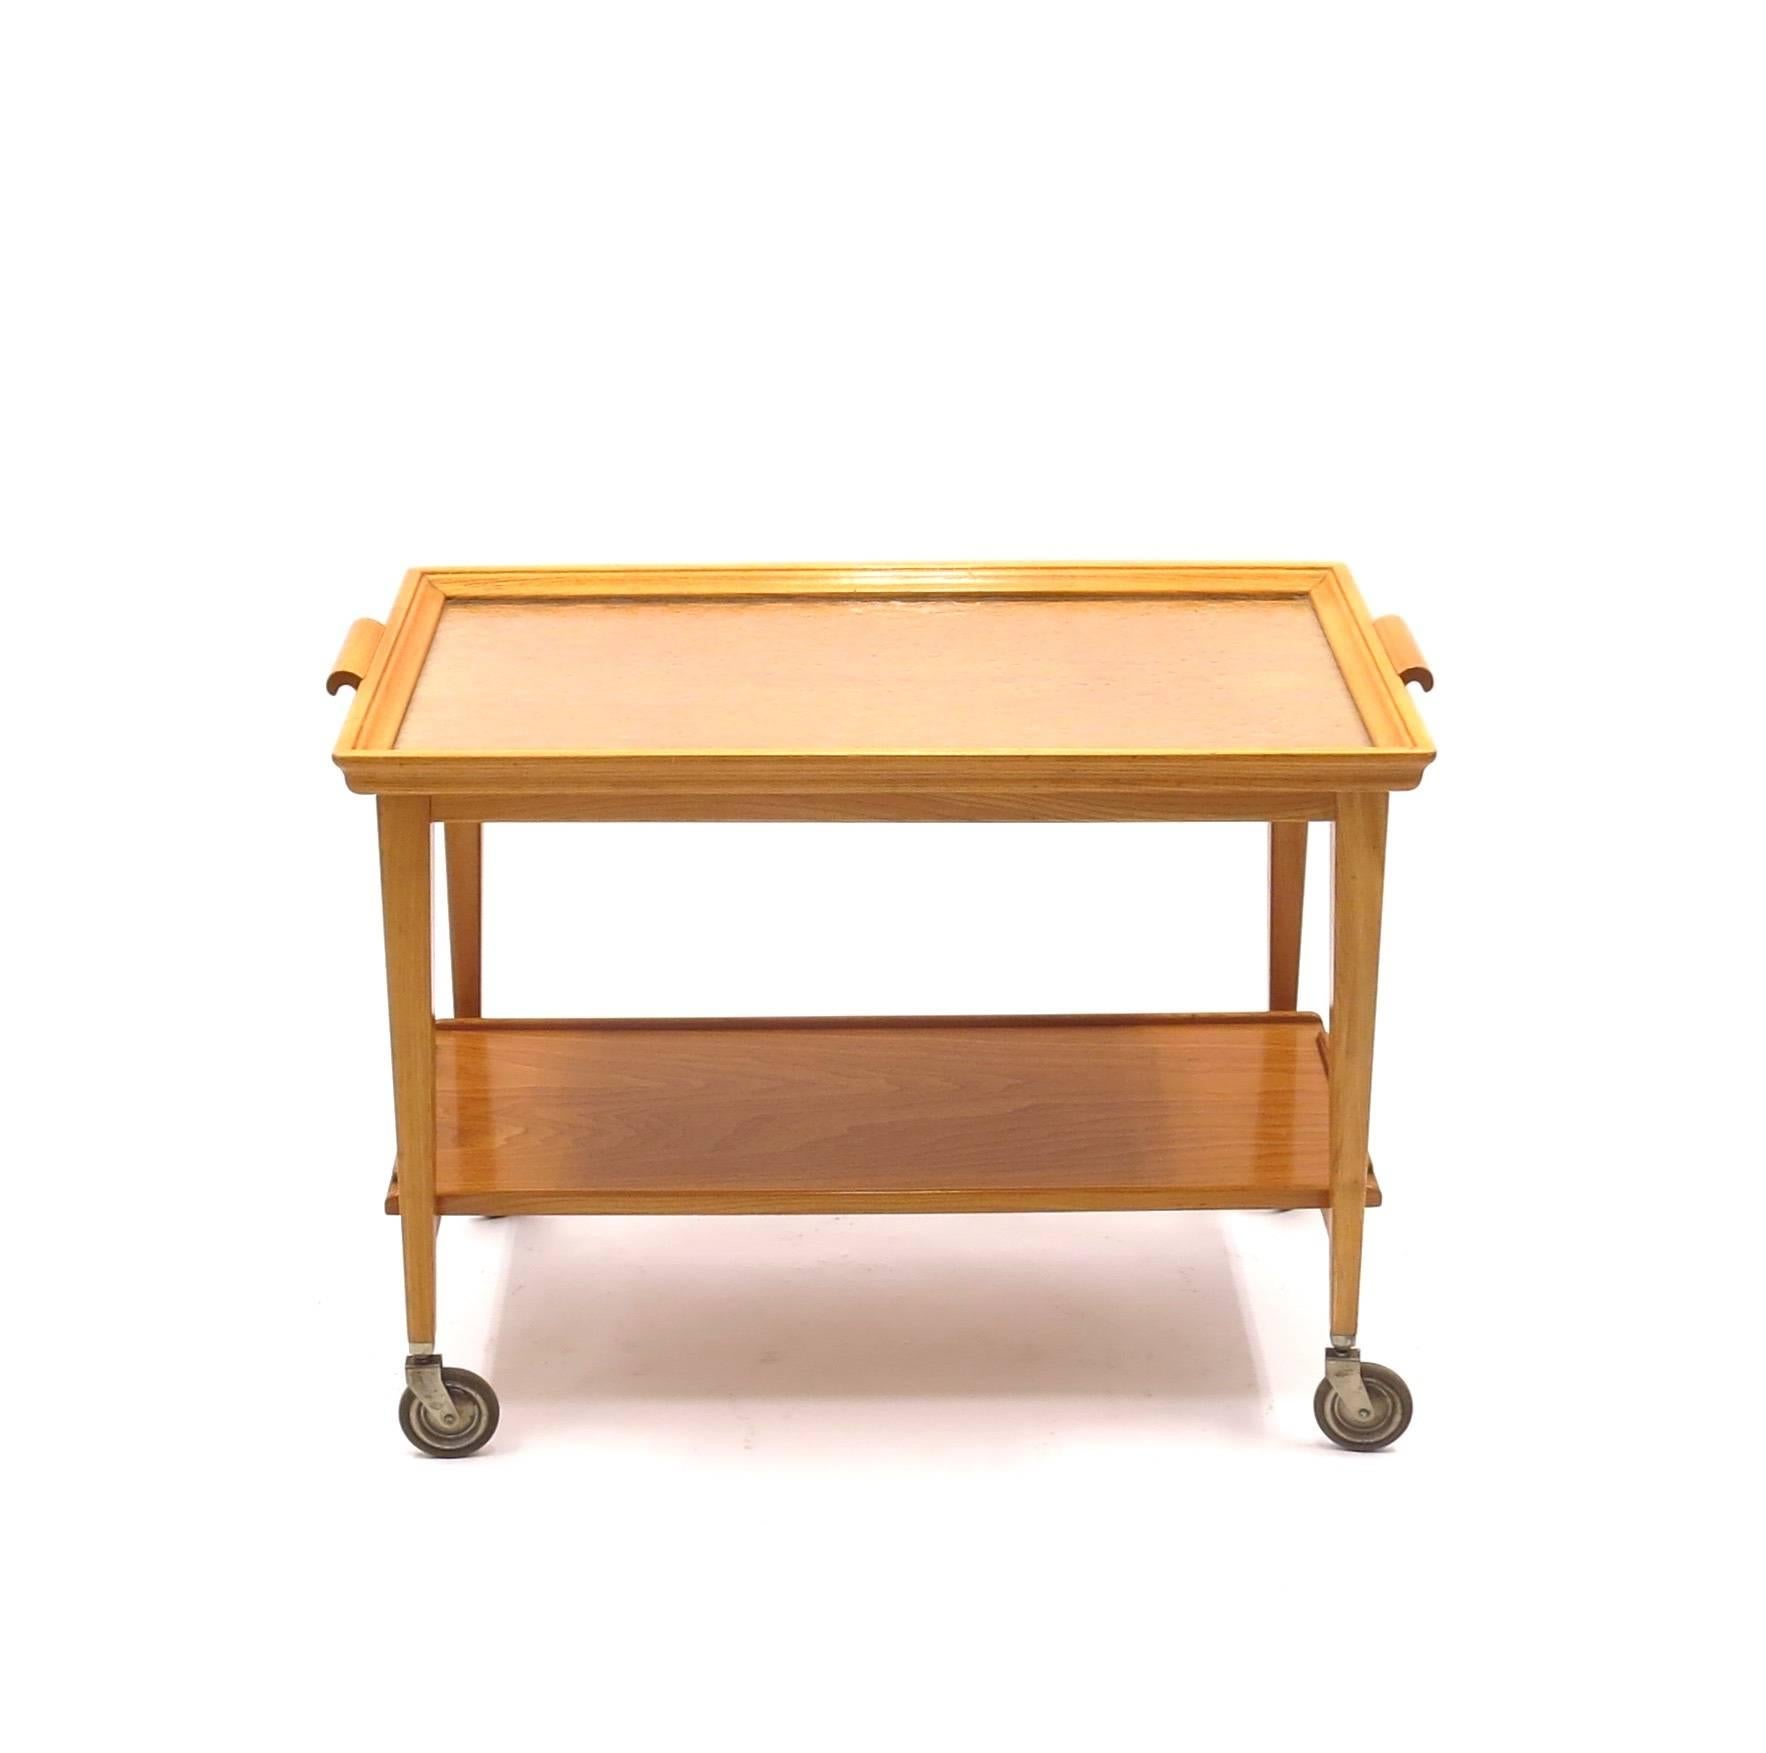 Mid-20th Century Midcentury Swedish Serving Trolley with Glass Tray from Bodafors, 1950s